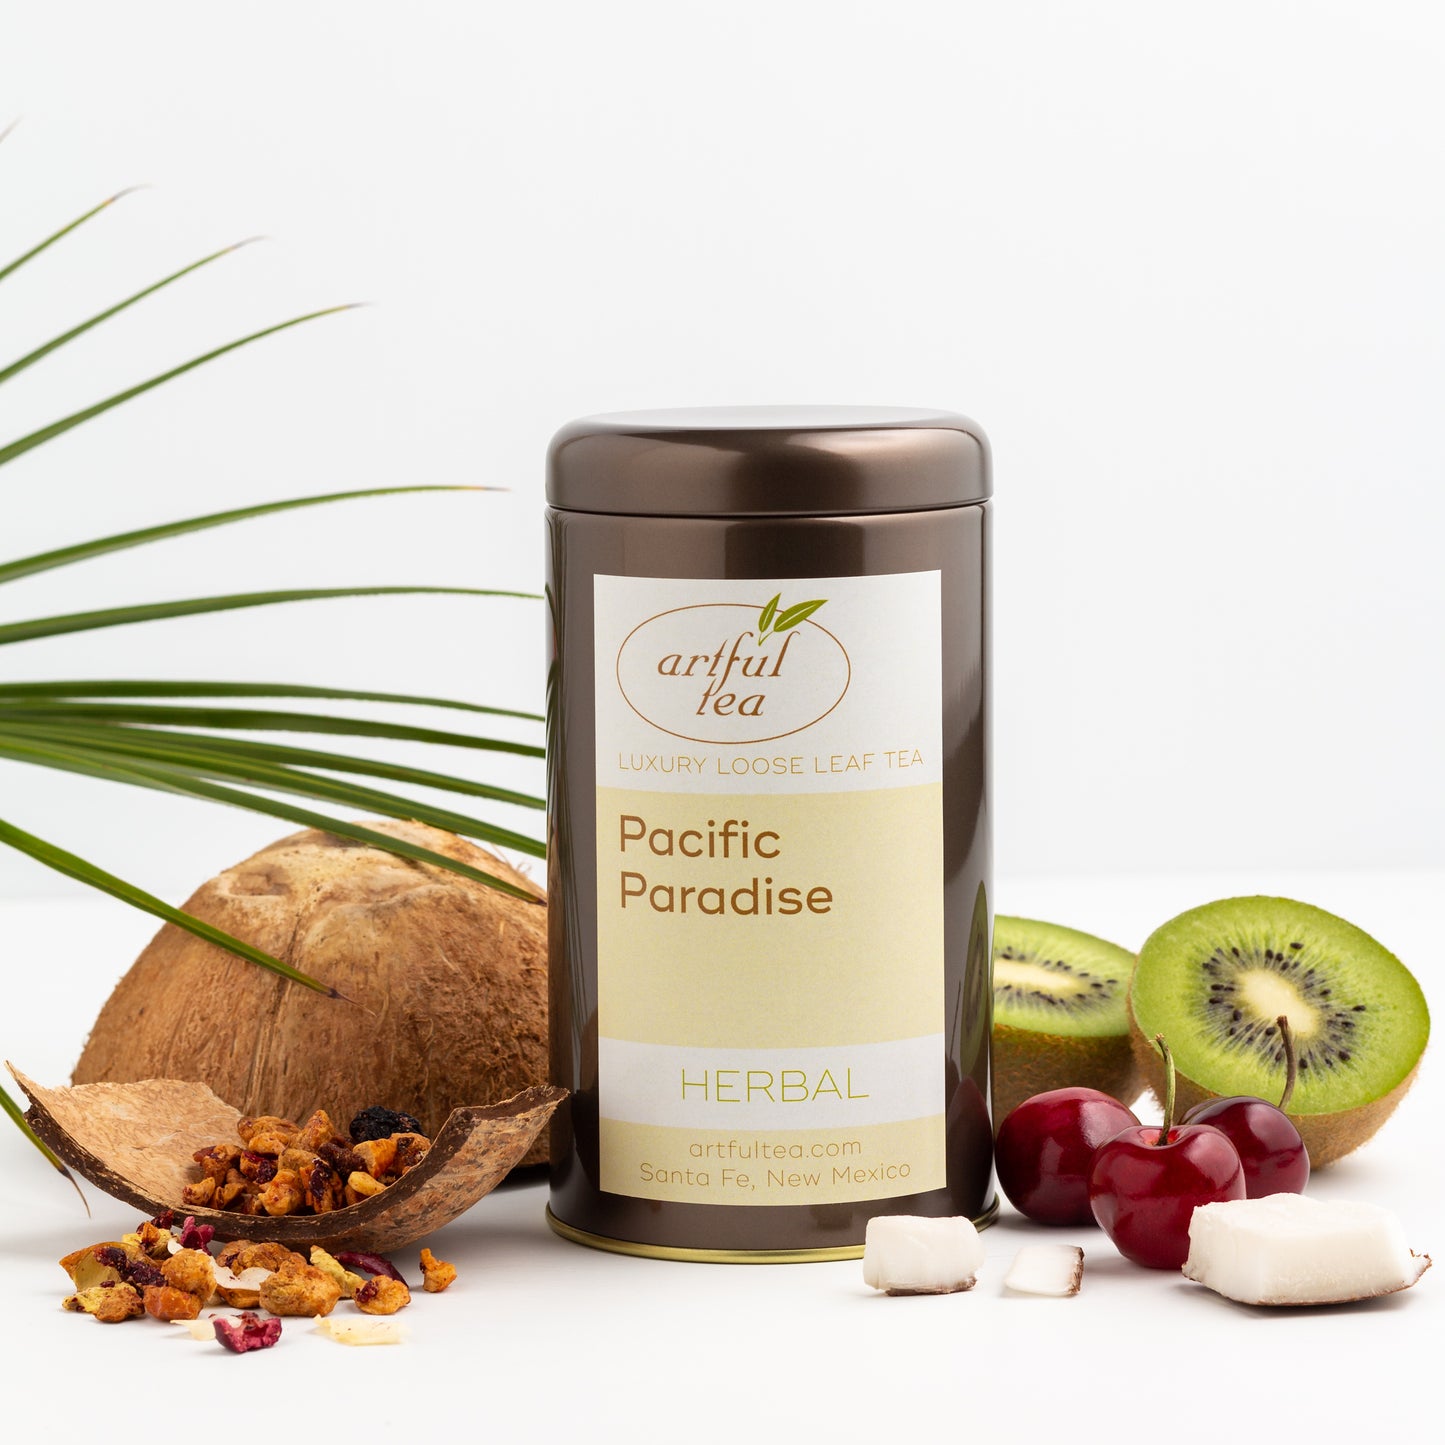 Pacific Paradise Herbal Tea shown packaged in a brown tin, surrounded by fresh kiwi, cherries and coconut